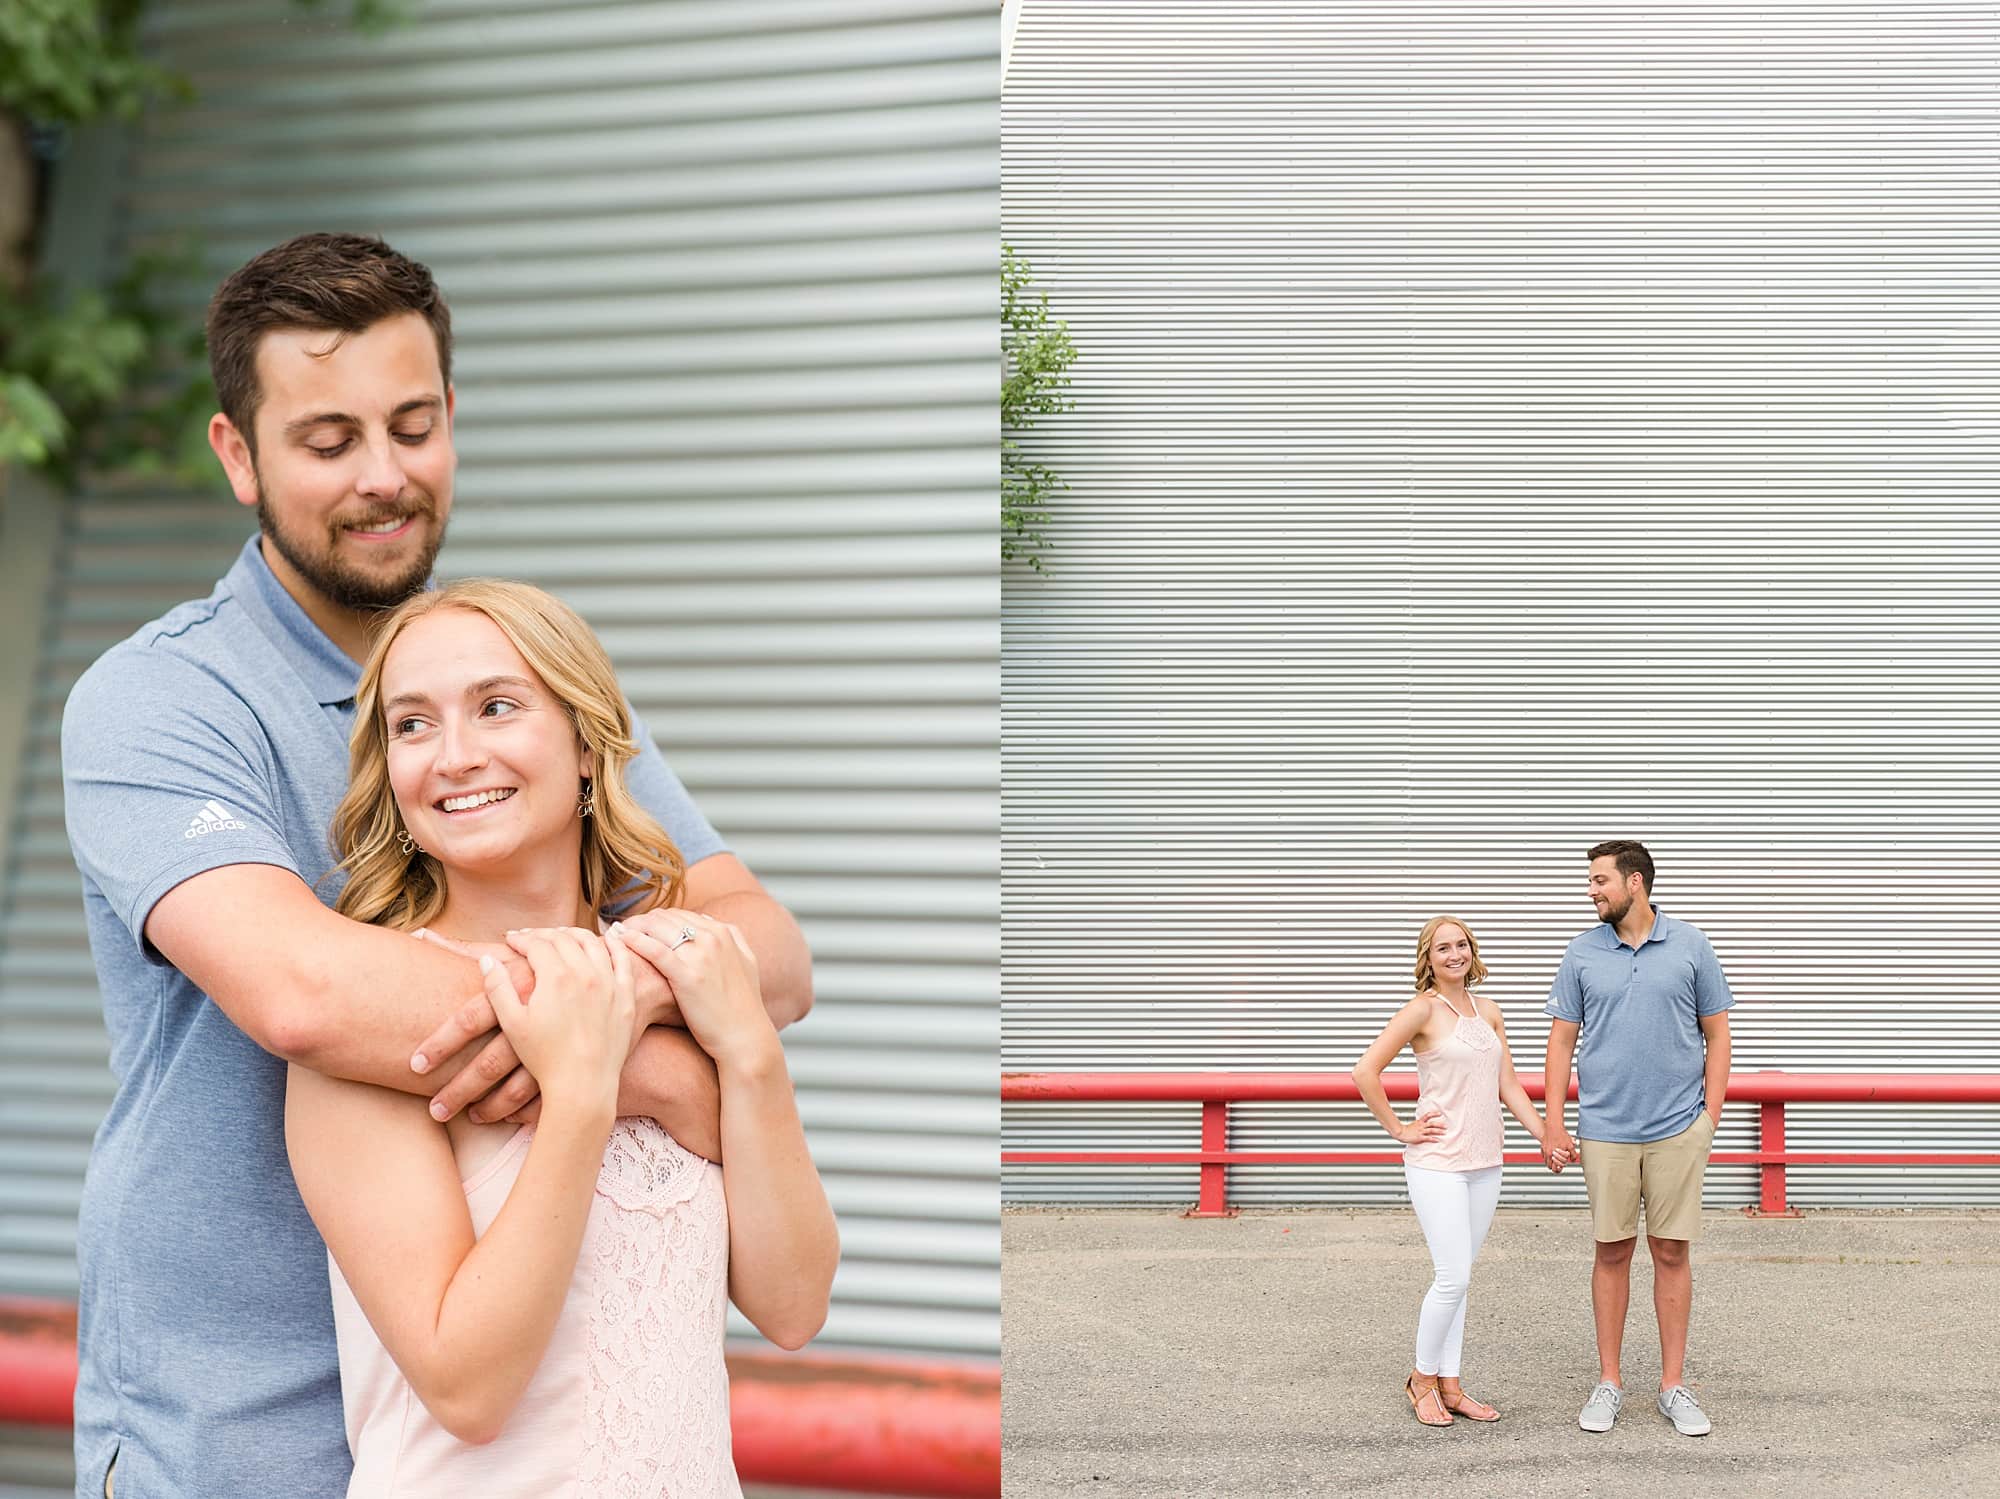 An engaged couple stand in front of a metal wall with a red railing in Downtown Fargo